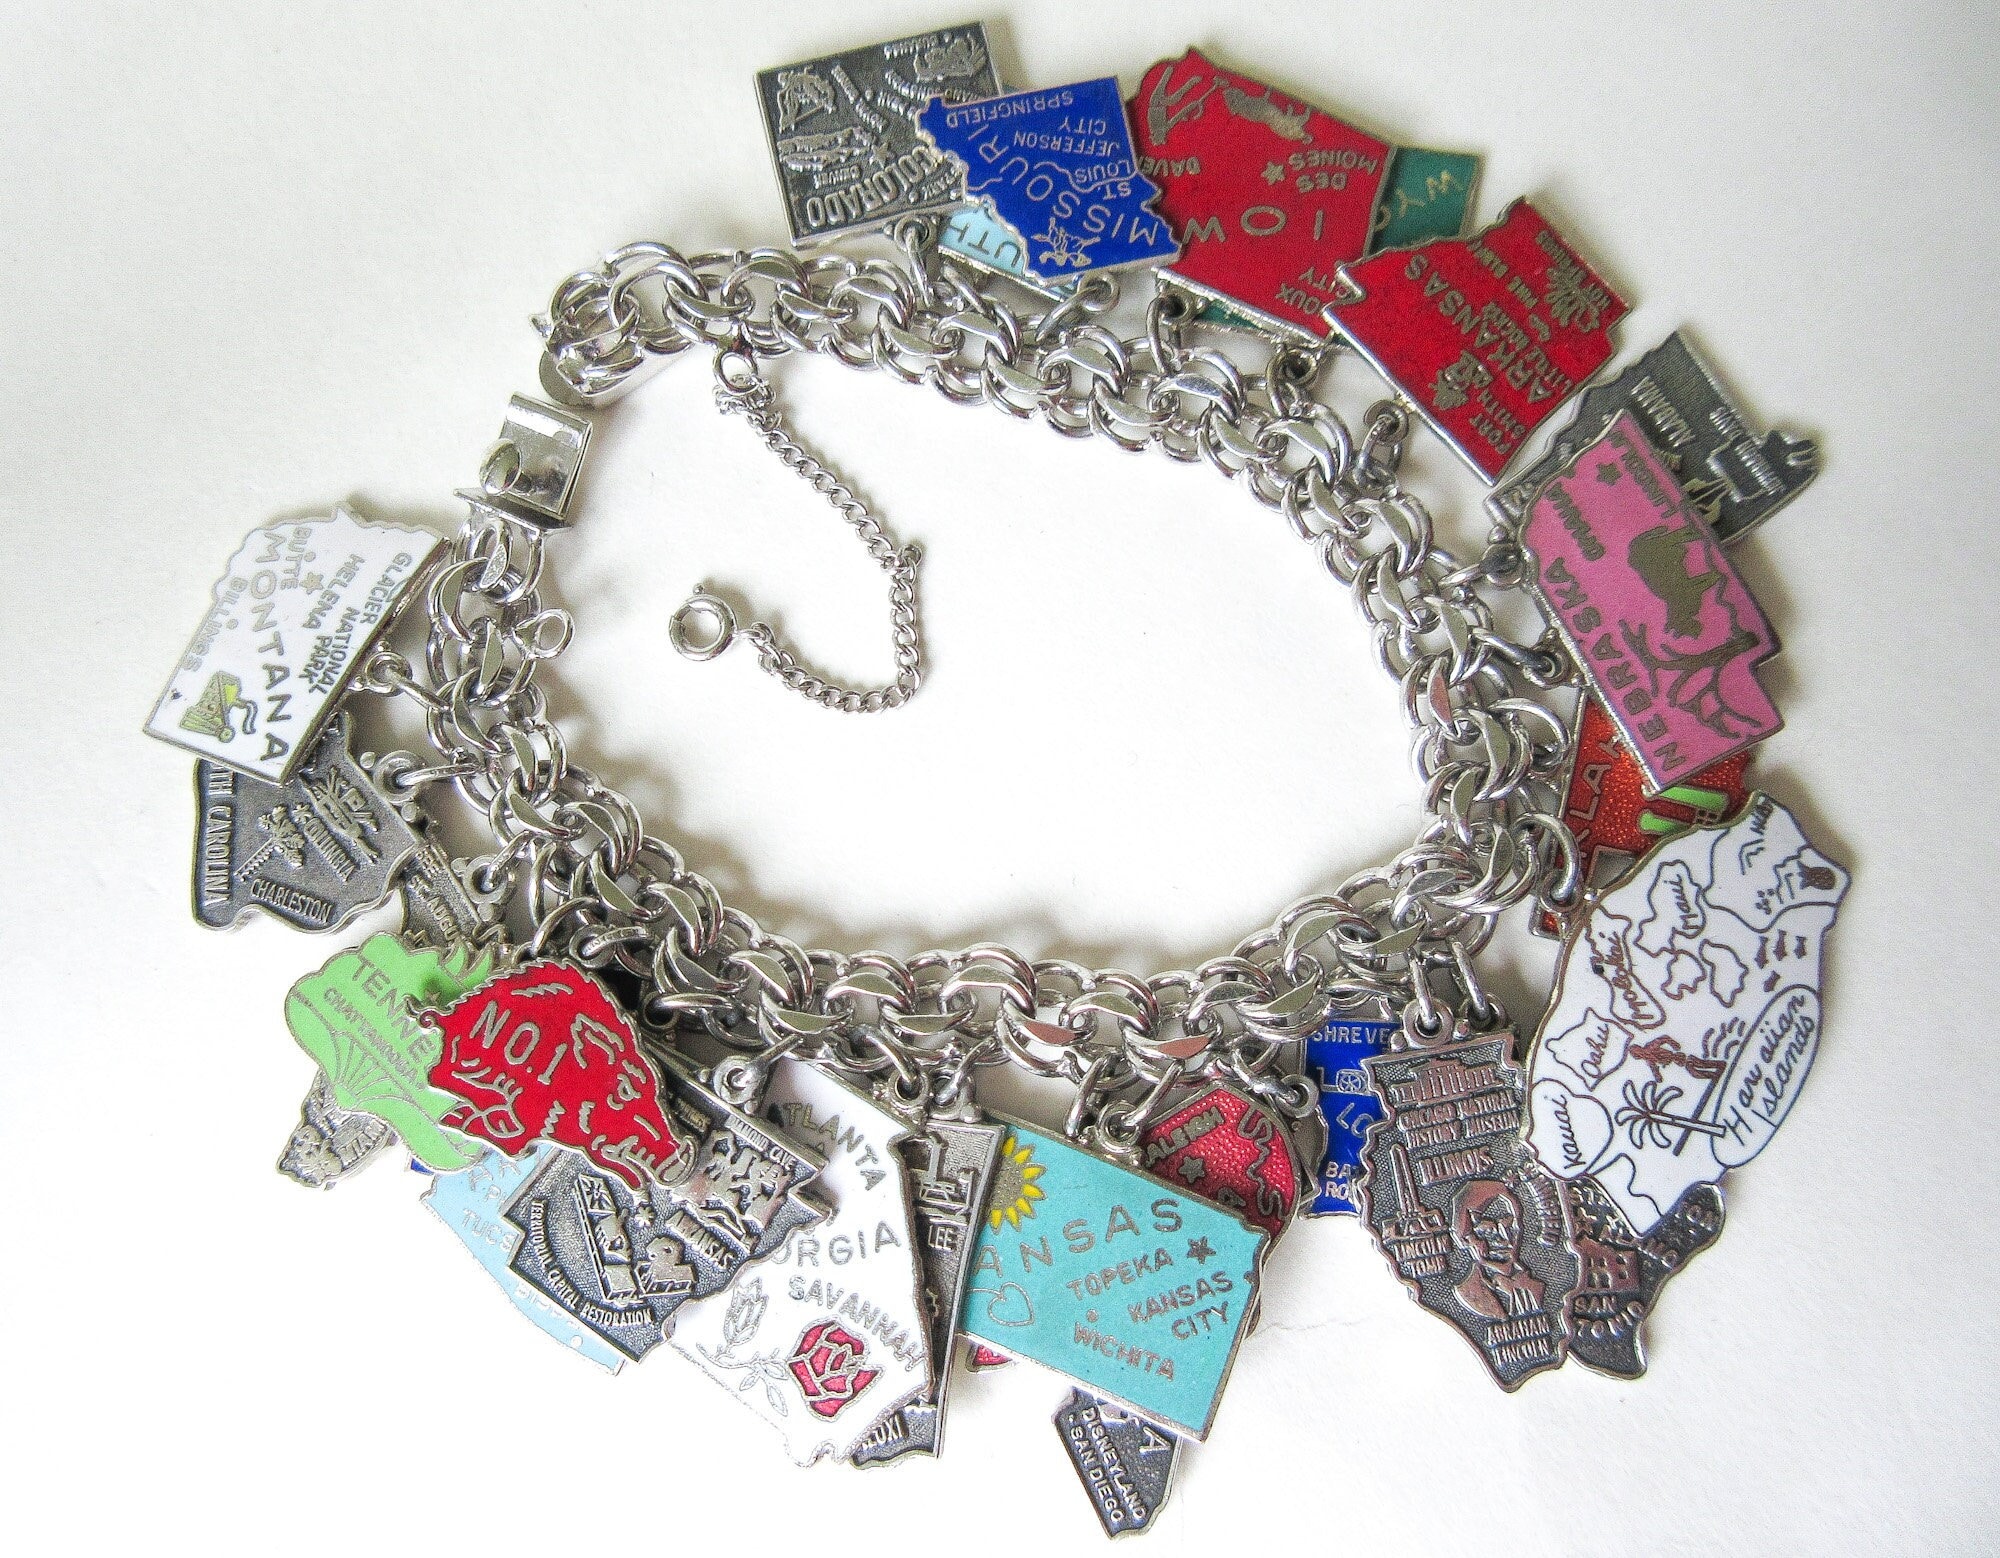 University of Louisville Jewelry for Women - Sterling Silver Charms,  Bracelets, Necklaces. Personalized Engraving.